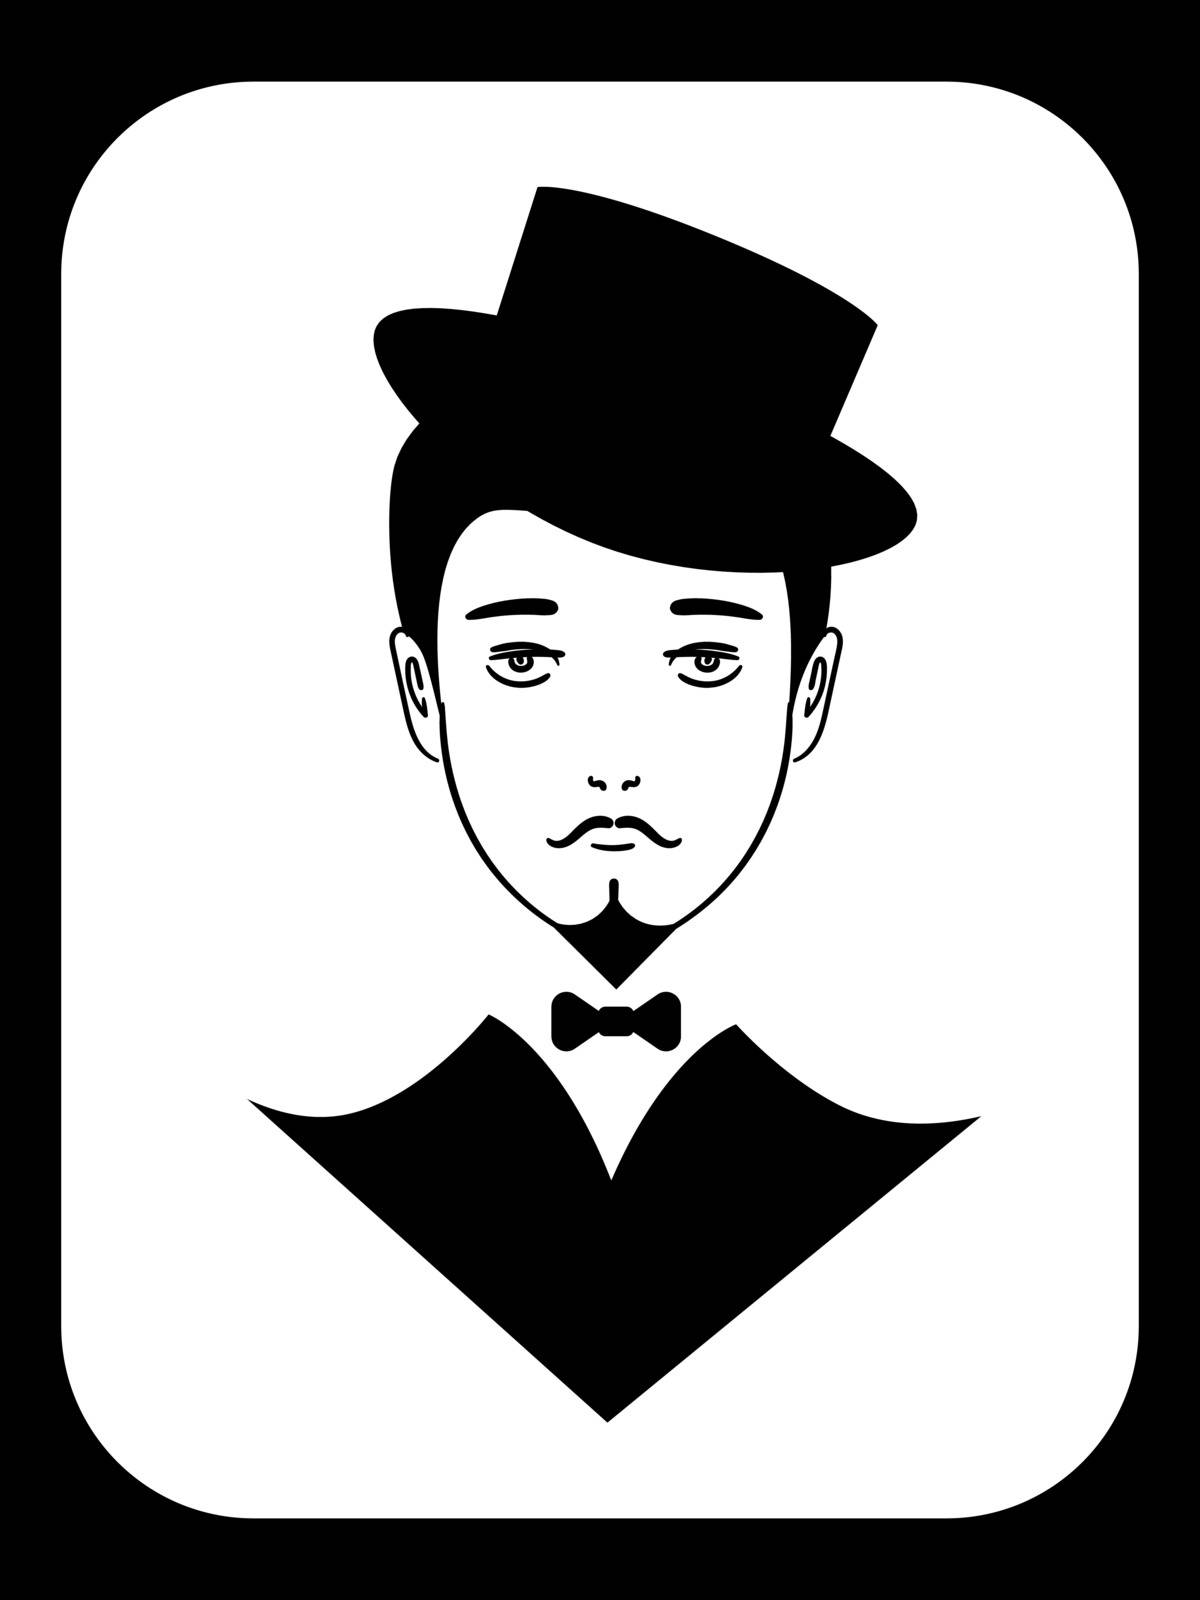 Black and white icon with vintage gentleman in tuxedo and hat